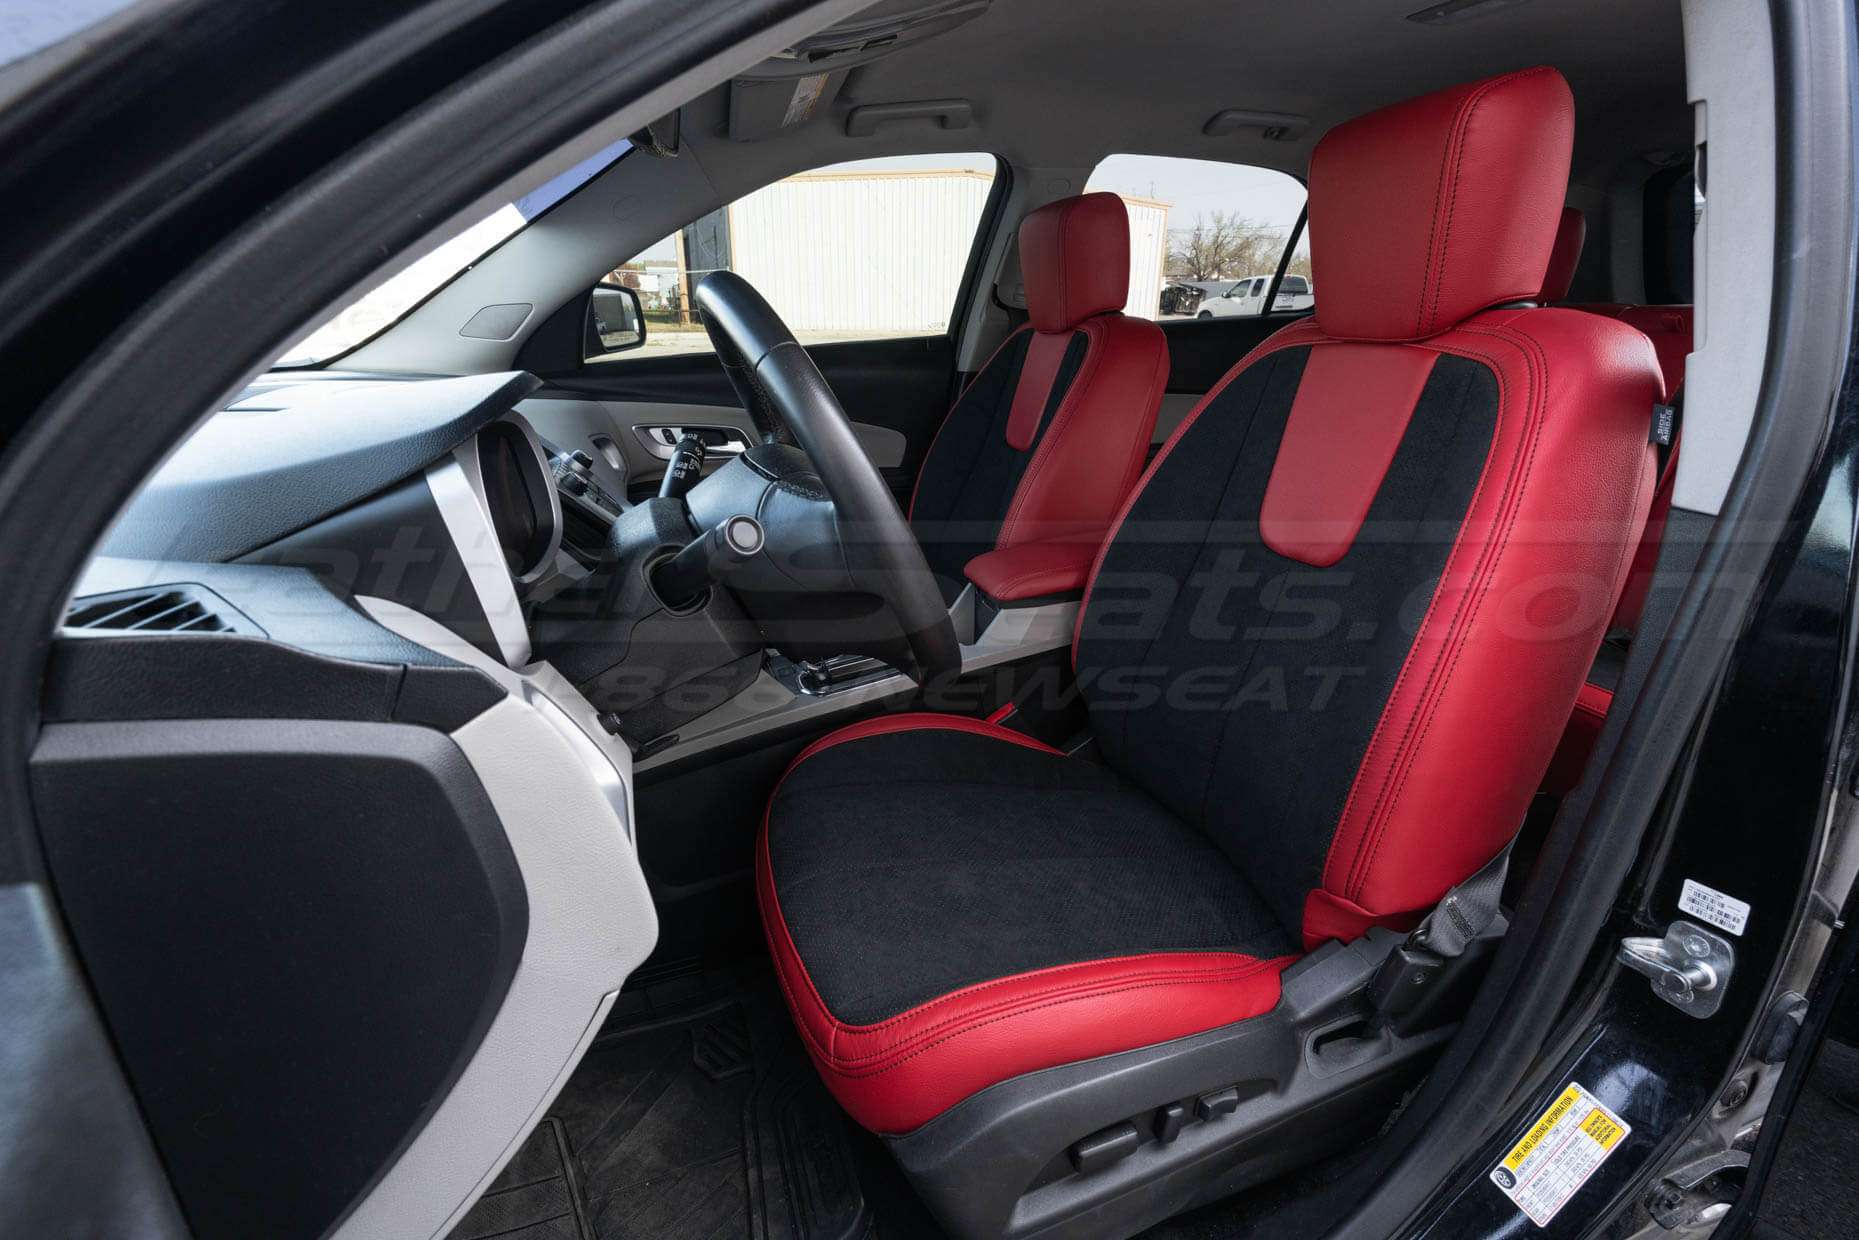 Chevrolet Equinox Installed Leather Seats - Red & Black - Full front driver seat